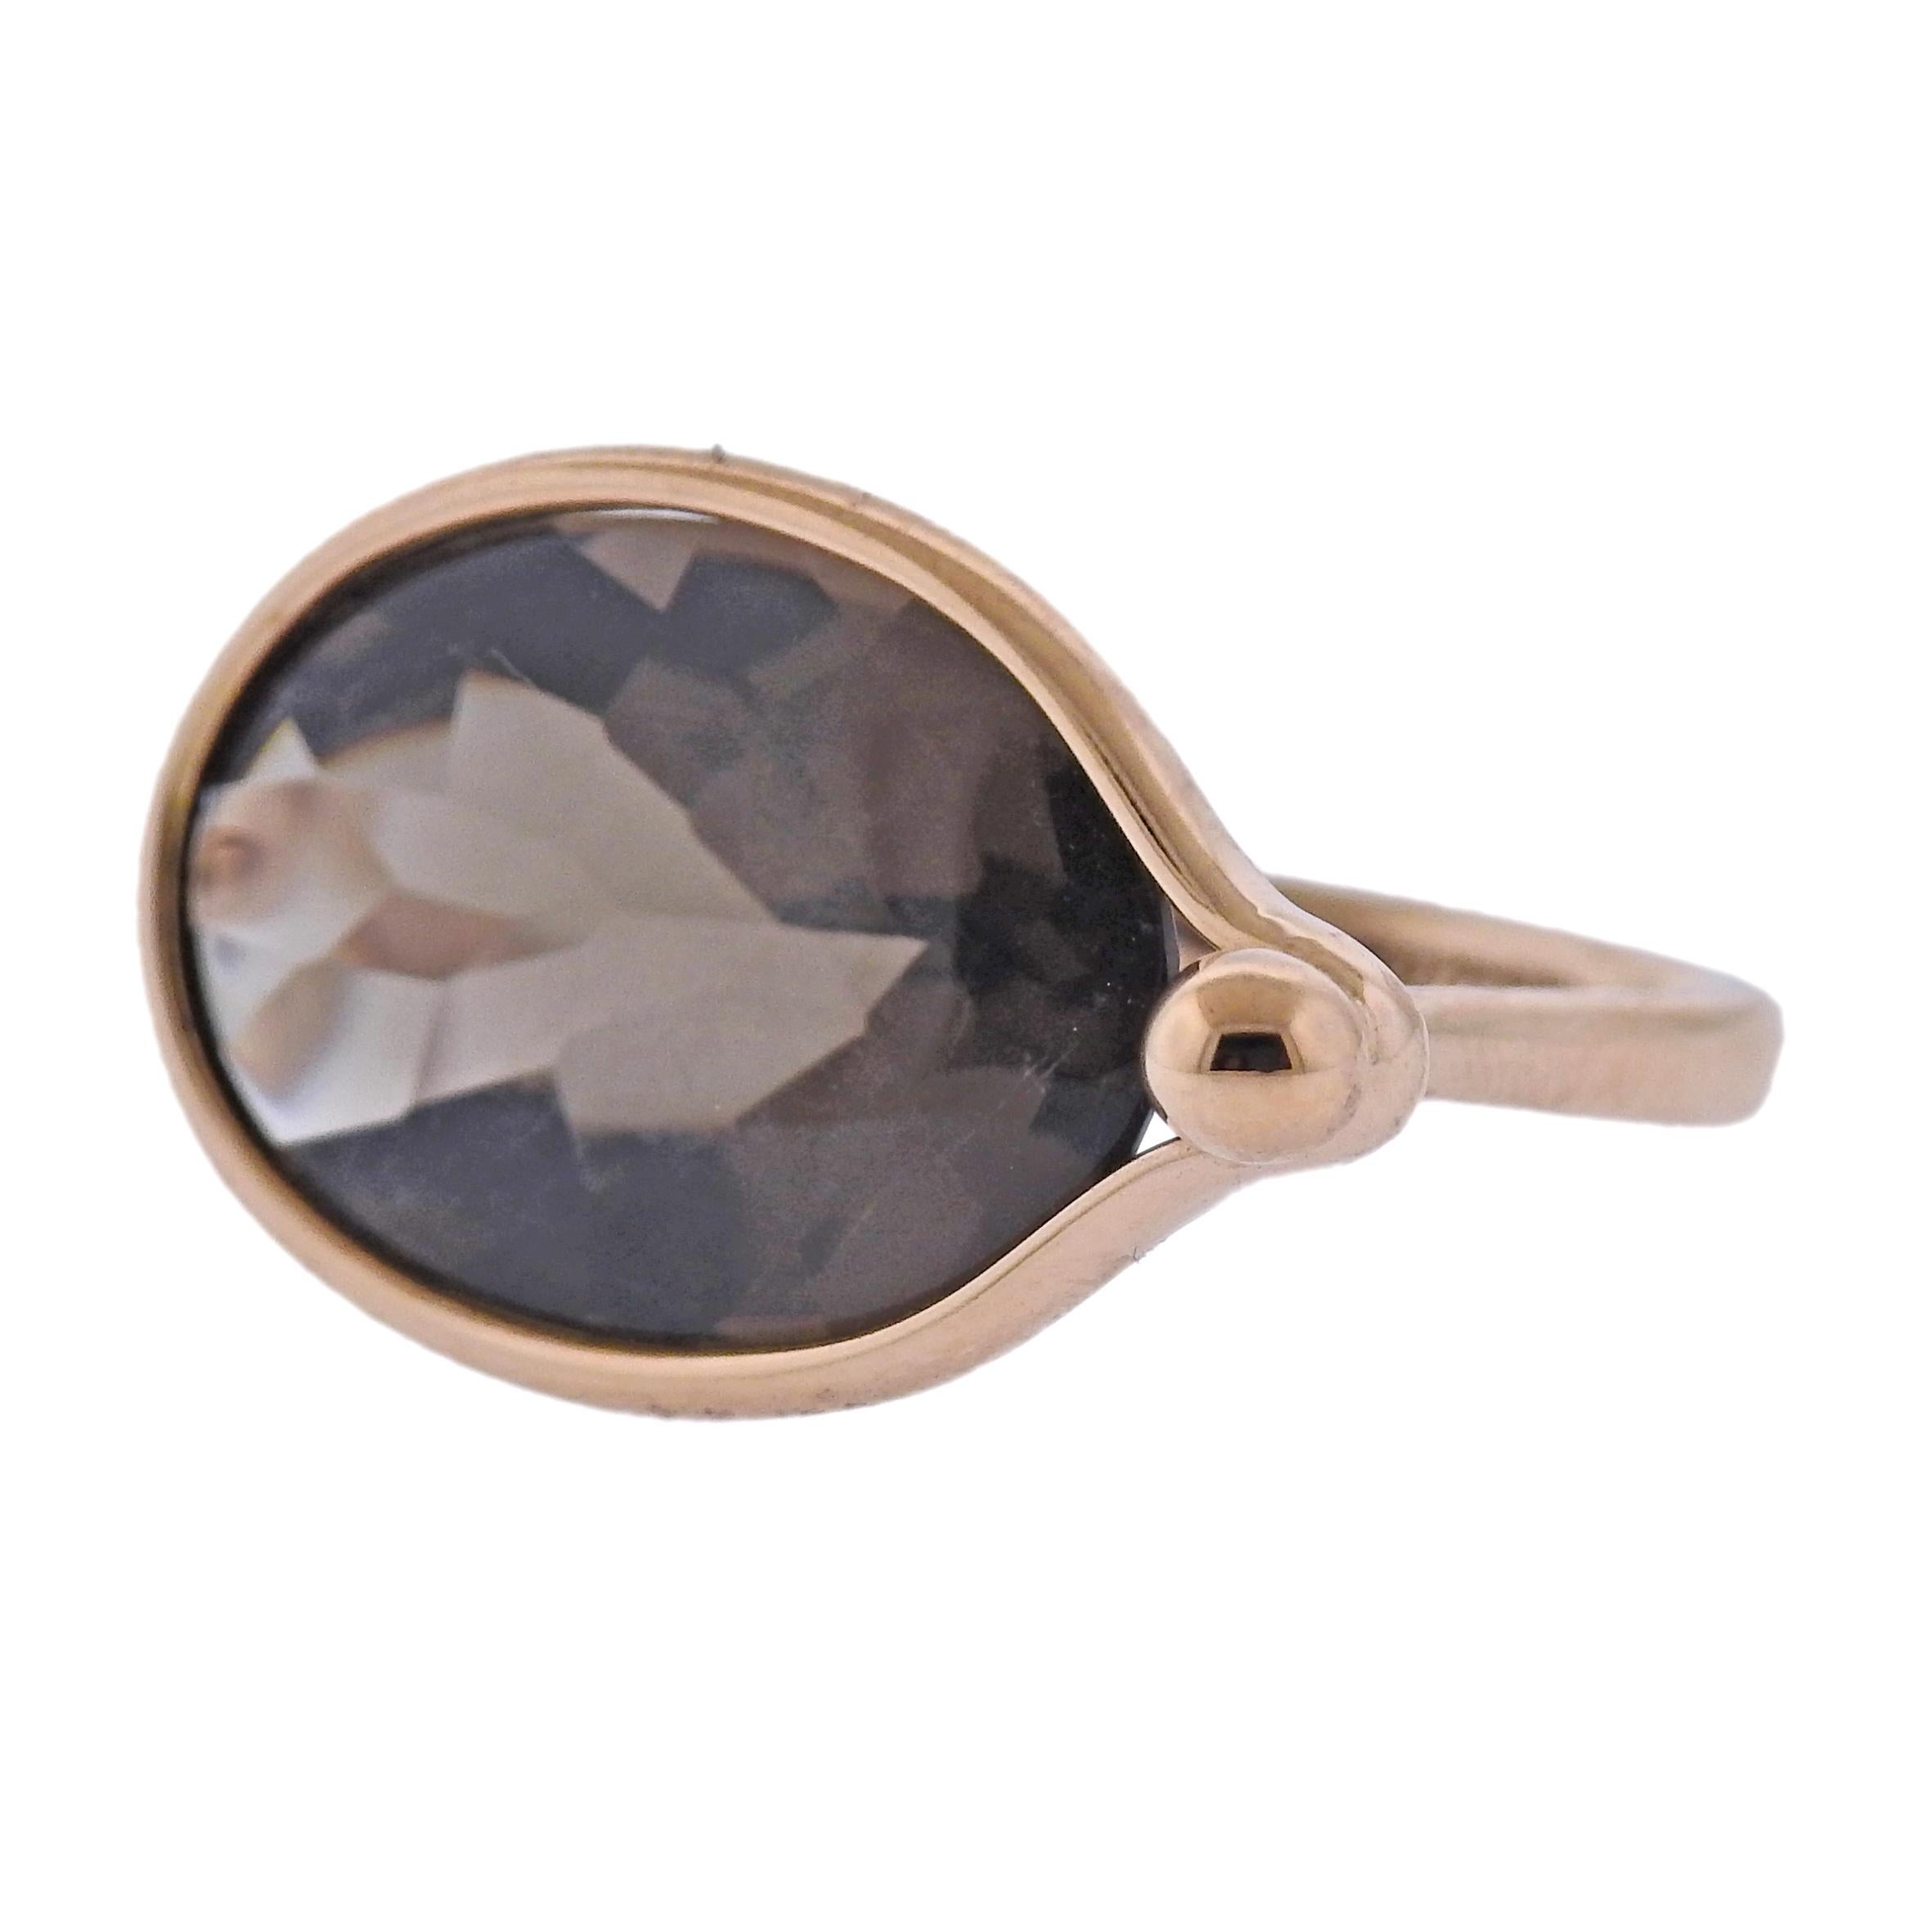 Brand new Georg Jensen 18k gold ring from Savannah collection with smokey quartz. Top of the ring - 15mm x 24mm. Available in sizes:  53, 51. Model # 10003228. Marked:  GJ mark, 750. Weight - 5.3 grams.